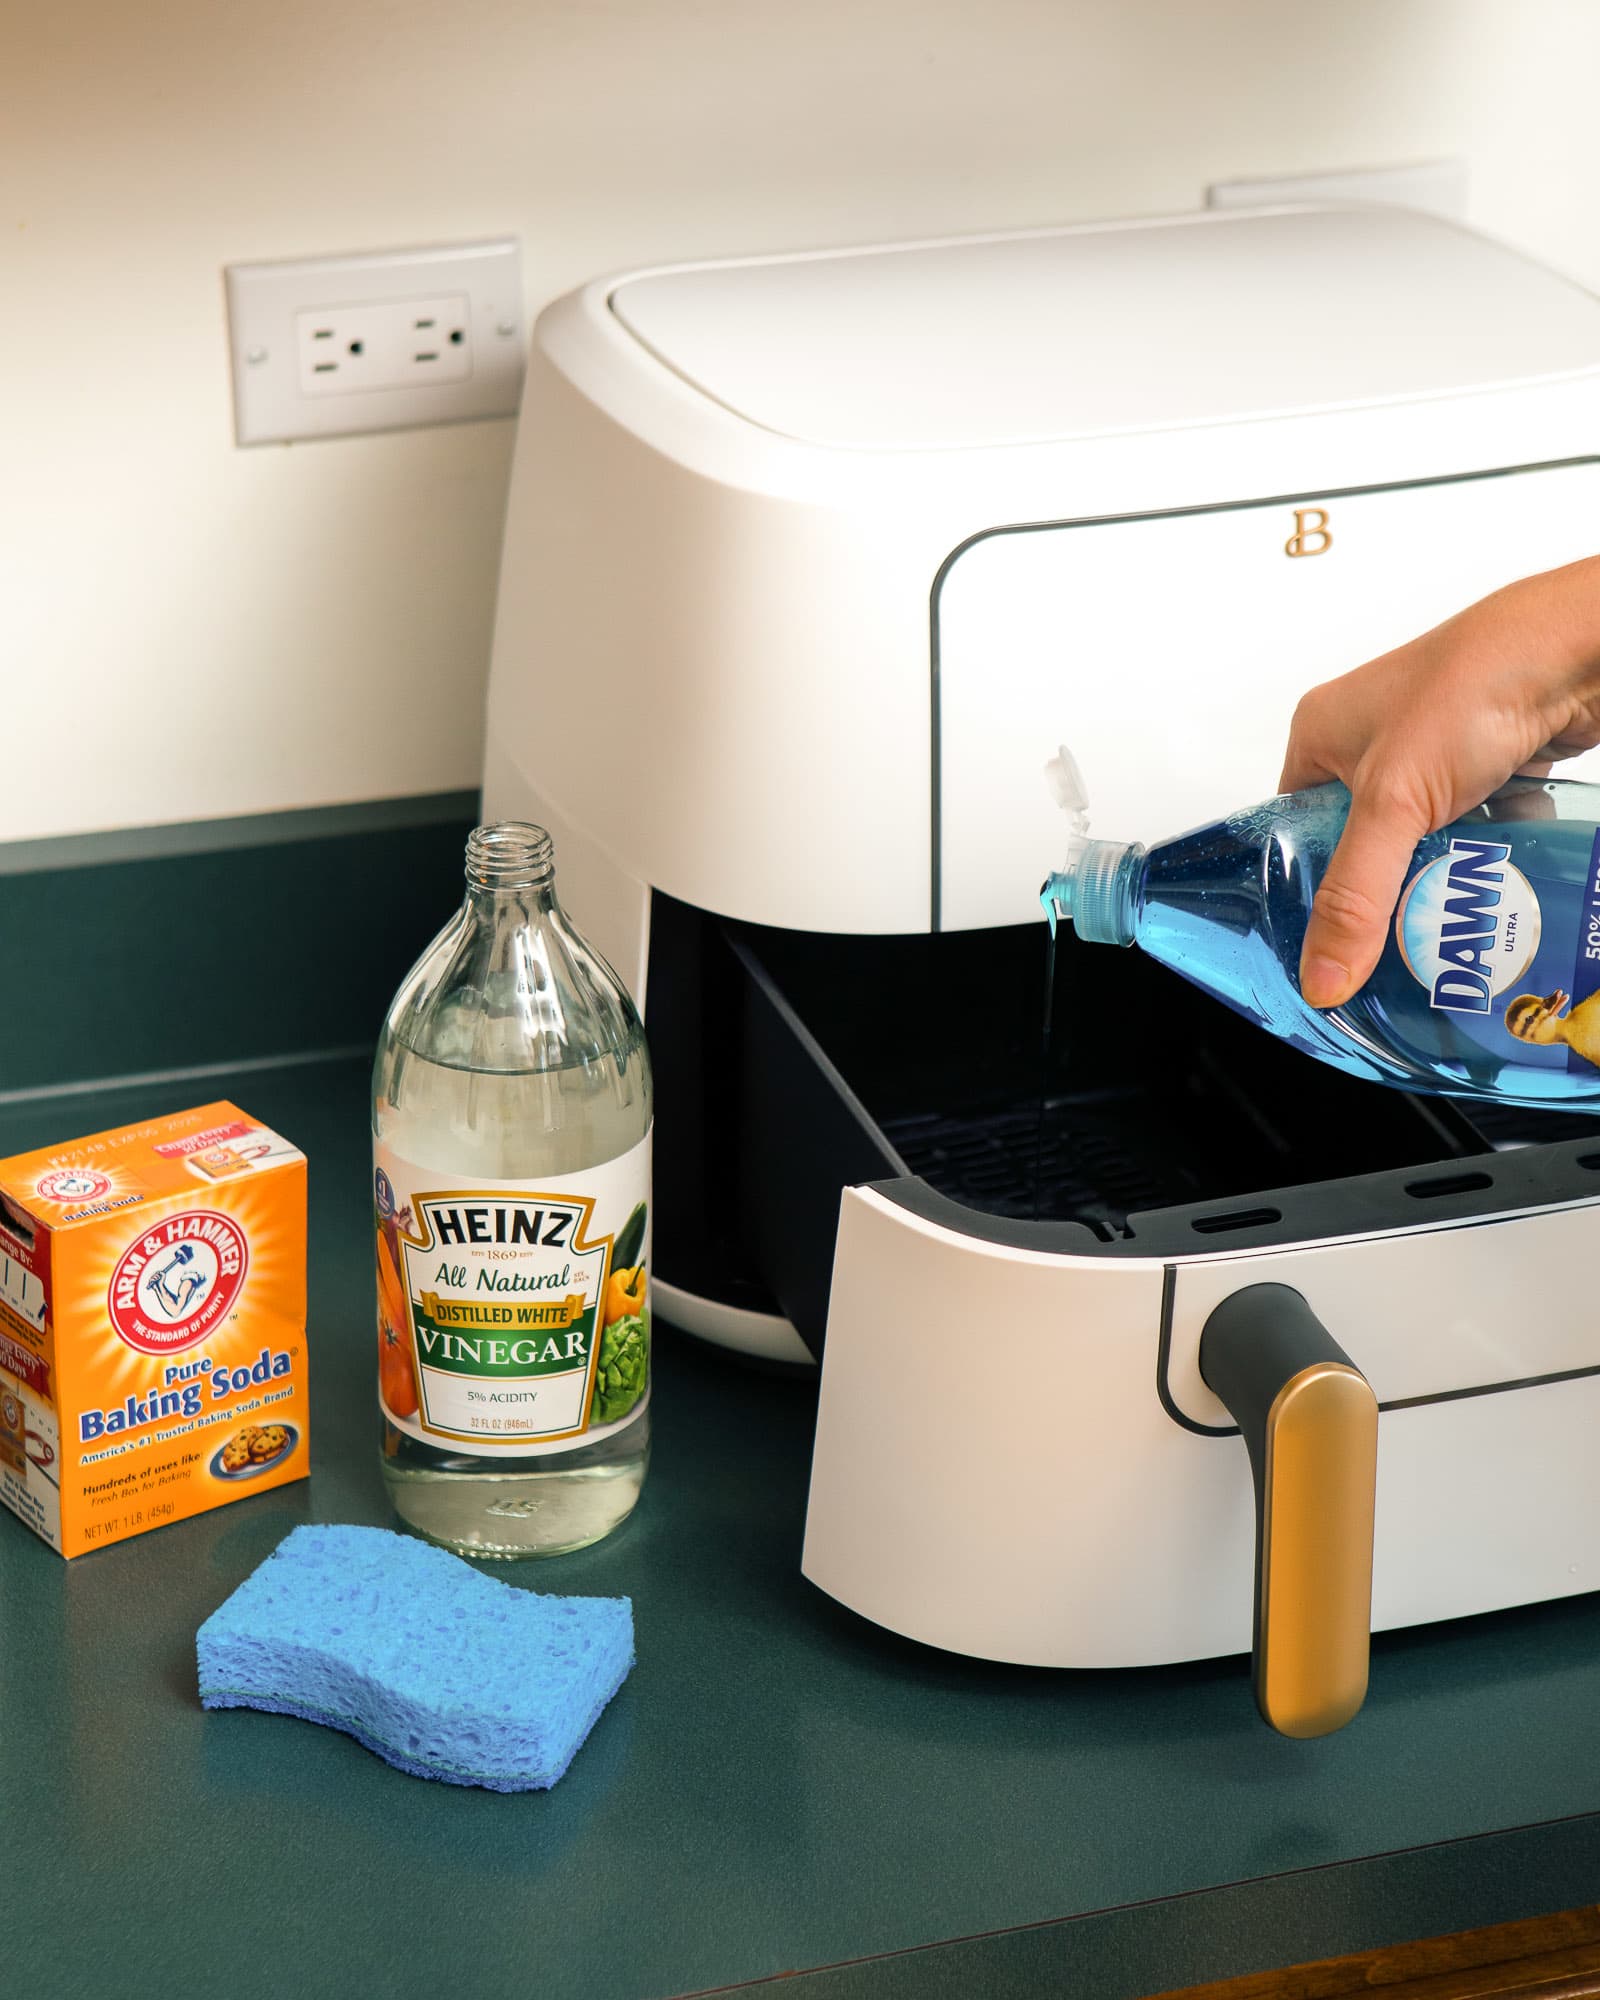 https://cdn.apartmenttherapy.info/image/upload/v1661178898/k/Photo/Lifestyle/2022-08-Cleaning-Showdown-We-Tested-Five-Methods-to-Clean-an-Air-Fryer-Basket/air-fryer-cleaning-showdown-10.jpg